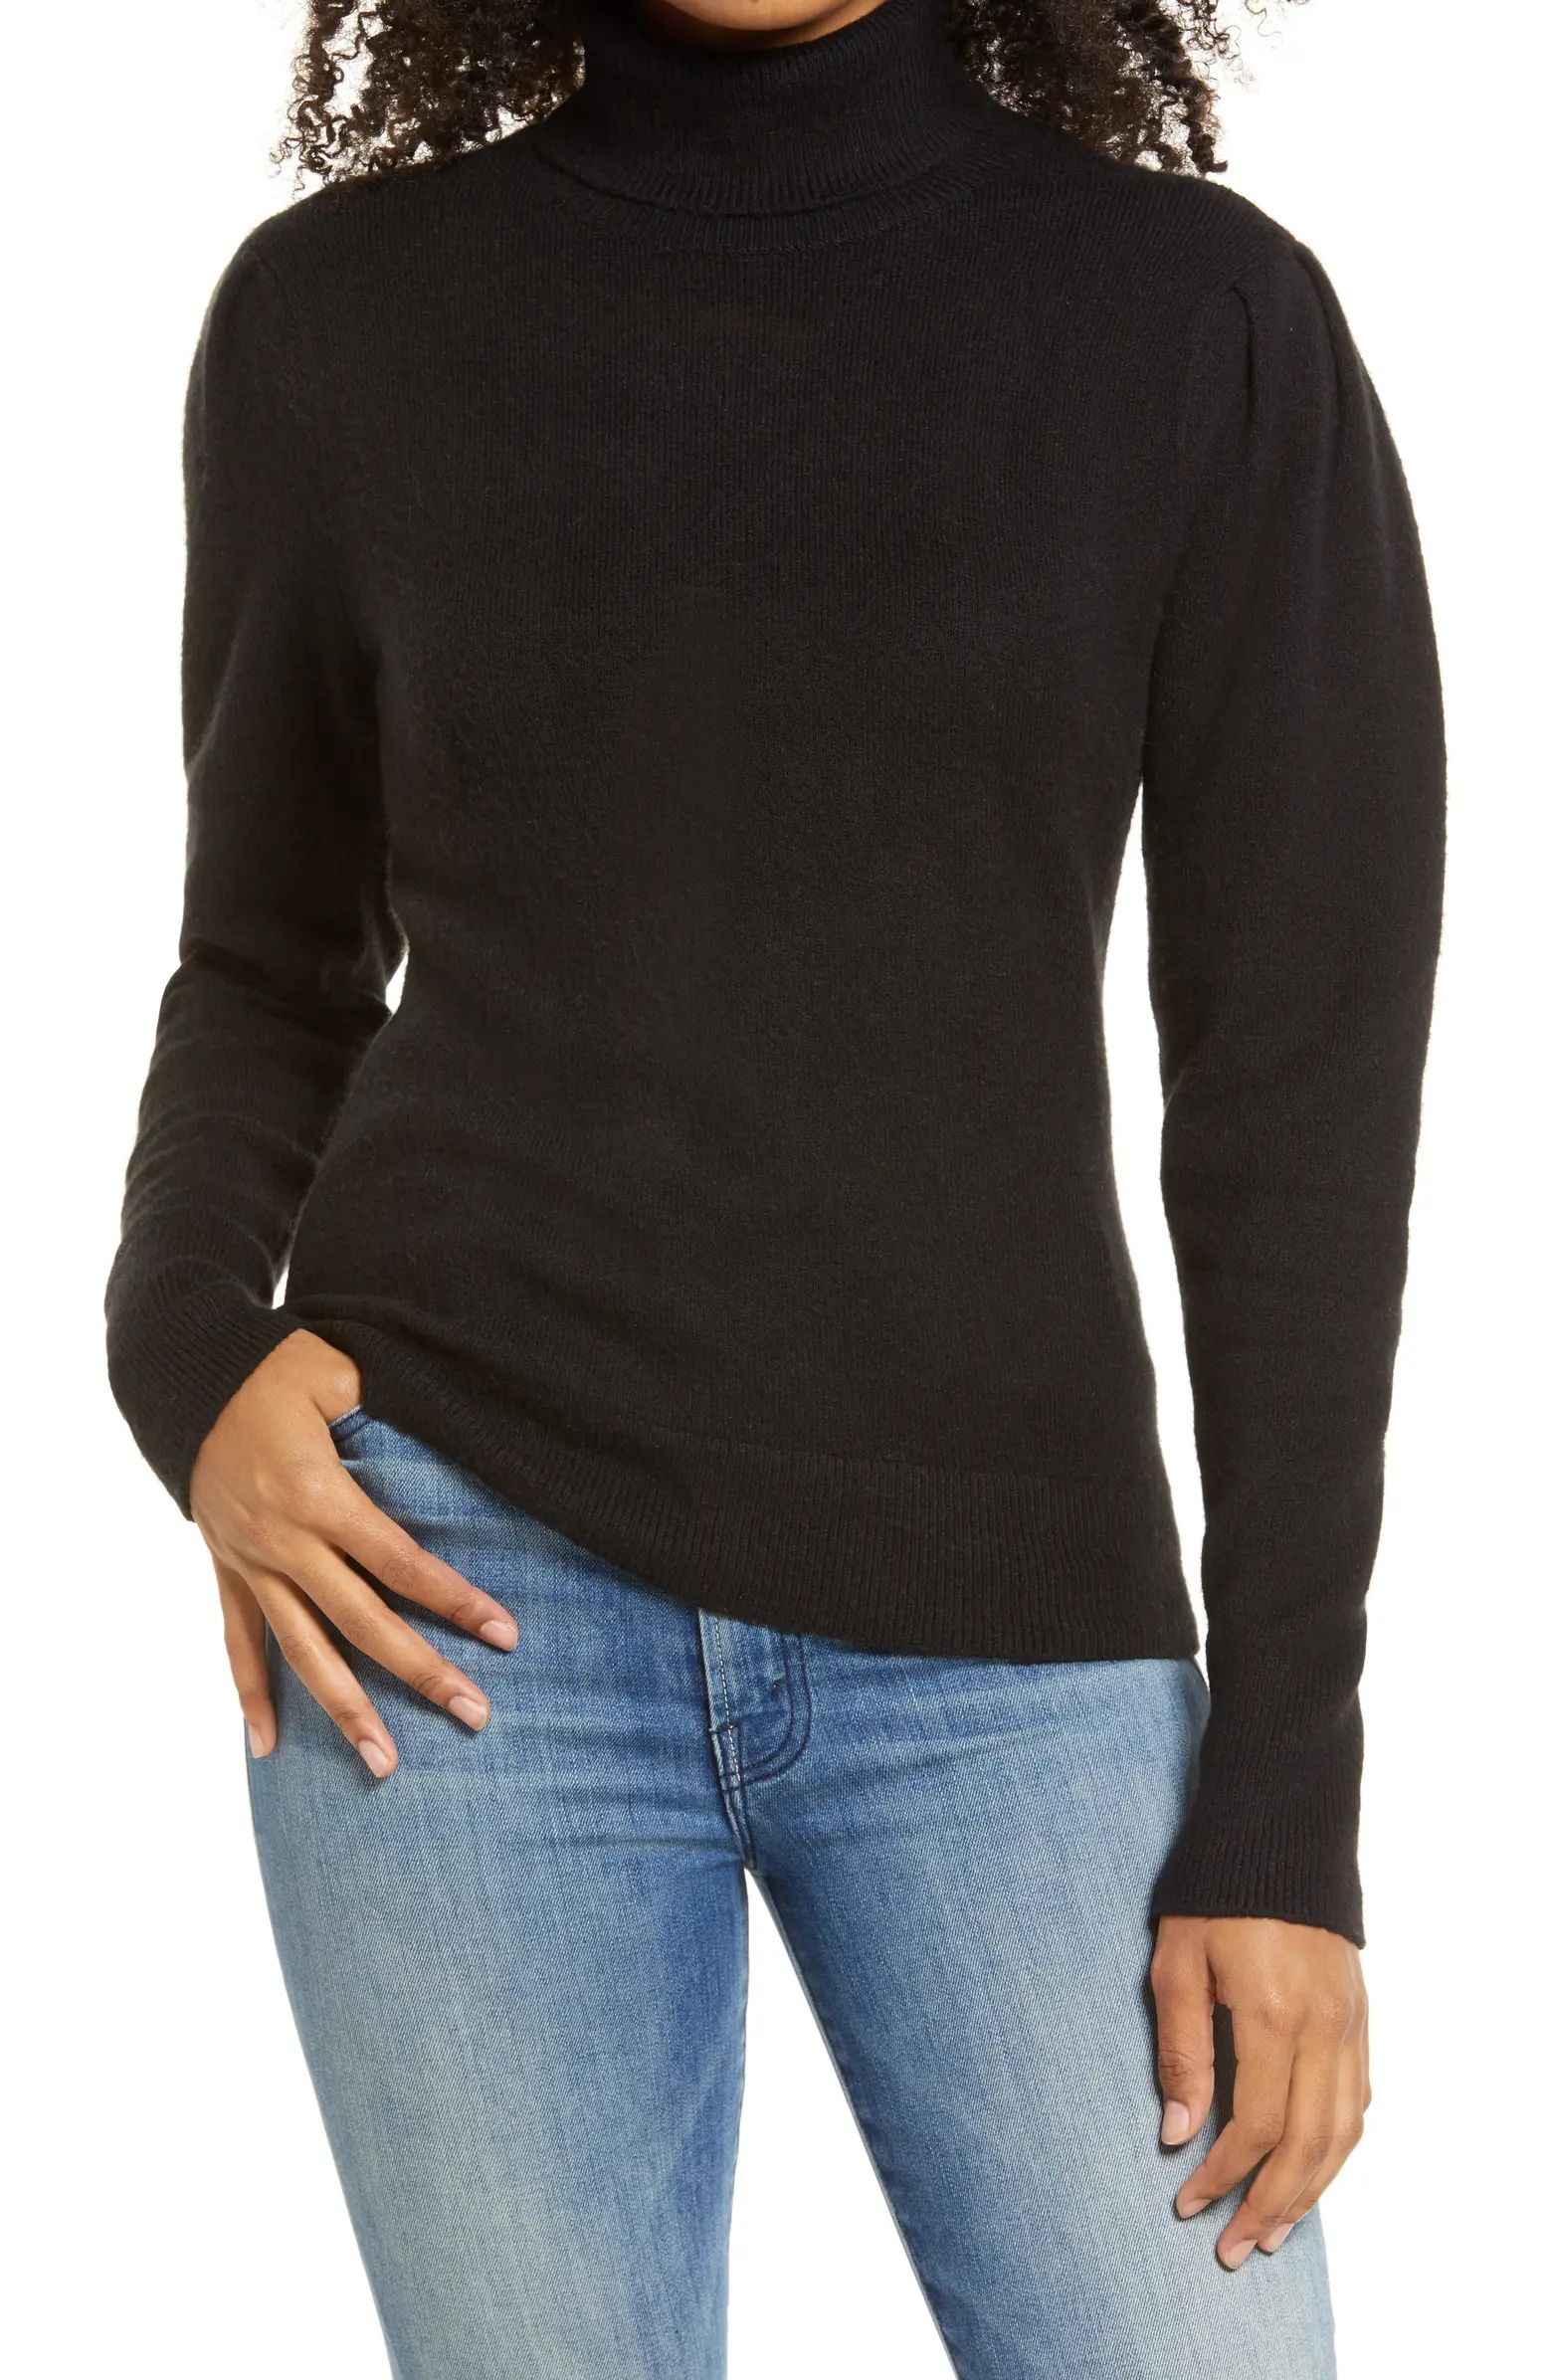 Rachell Parcell Puff Shoulder Turtleneck Sweater | Nordstrom